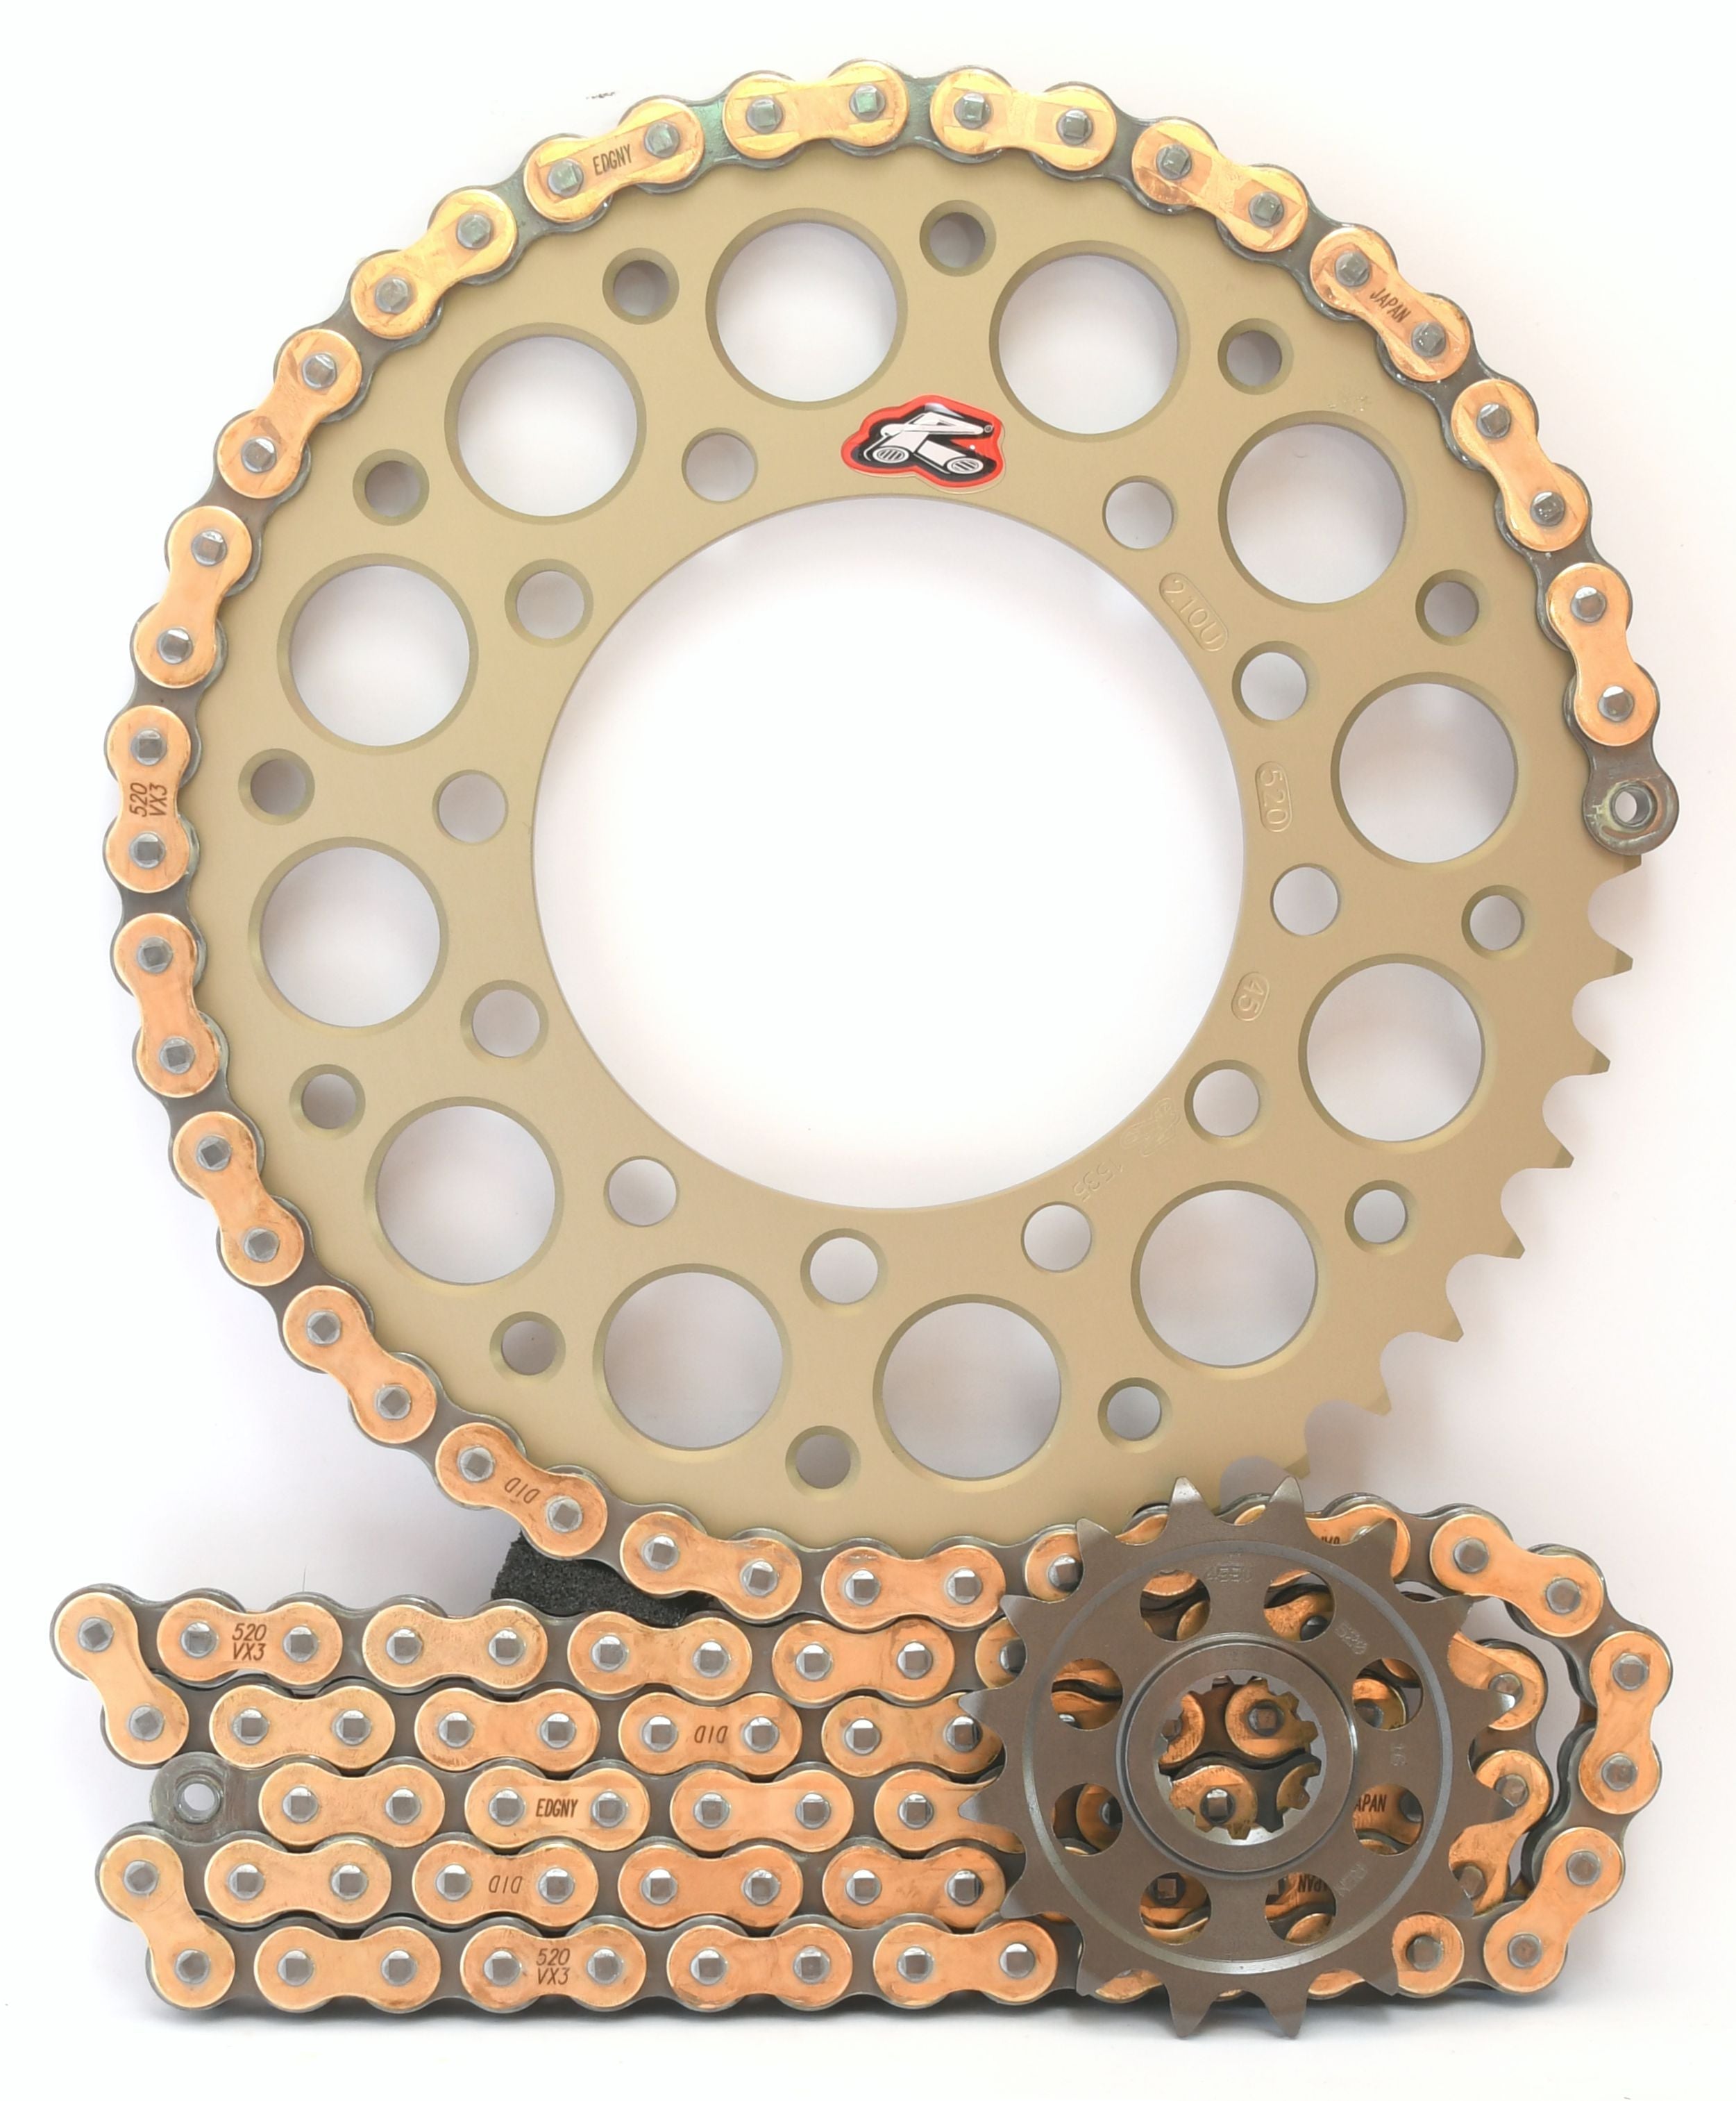 Renthal Ultralight DID Chain & Sprocket Kit 520 Conversion for Suzuki GSX-R750 2011-2018 - Choose Your Gearing